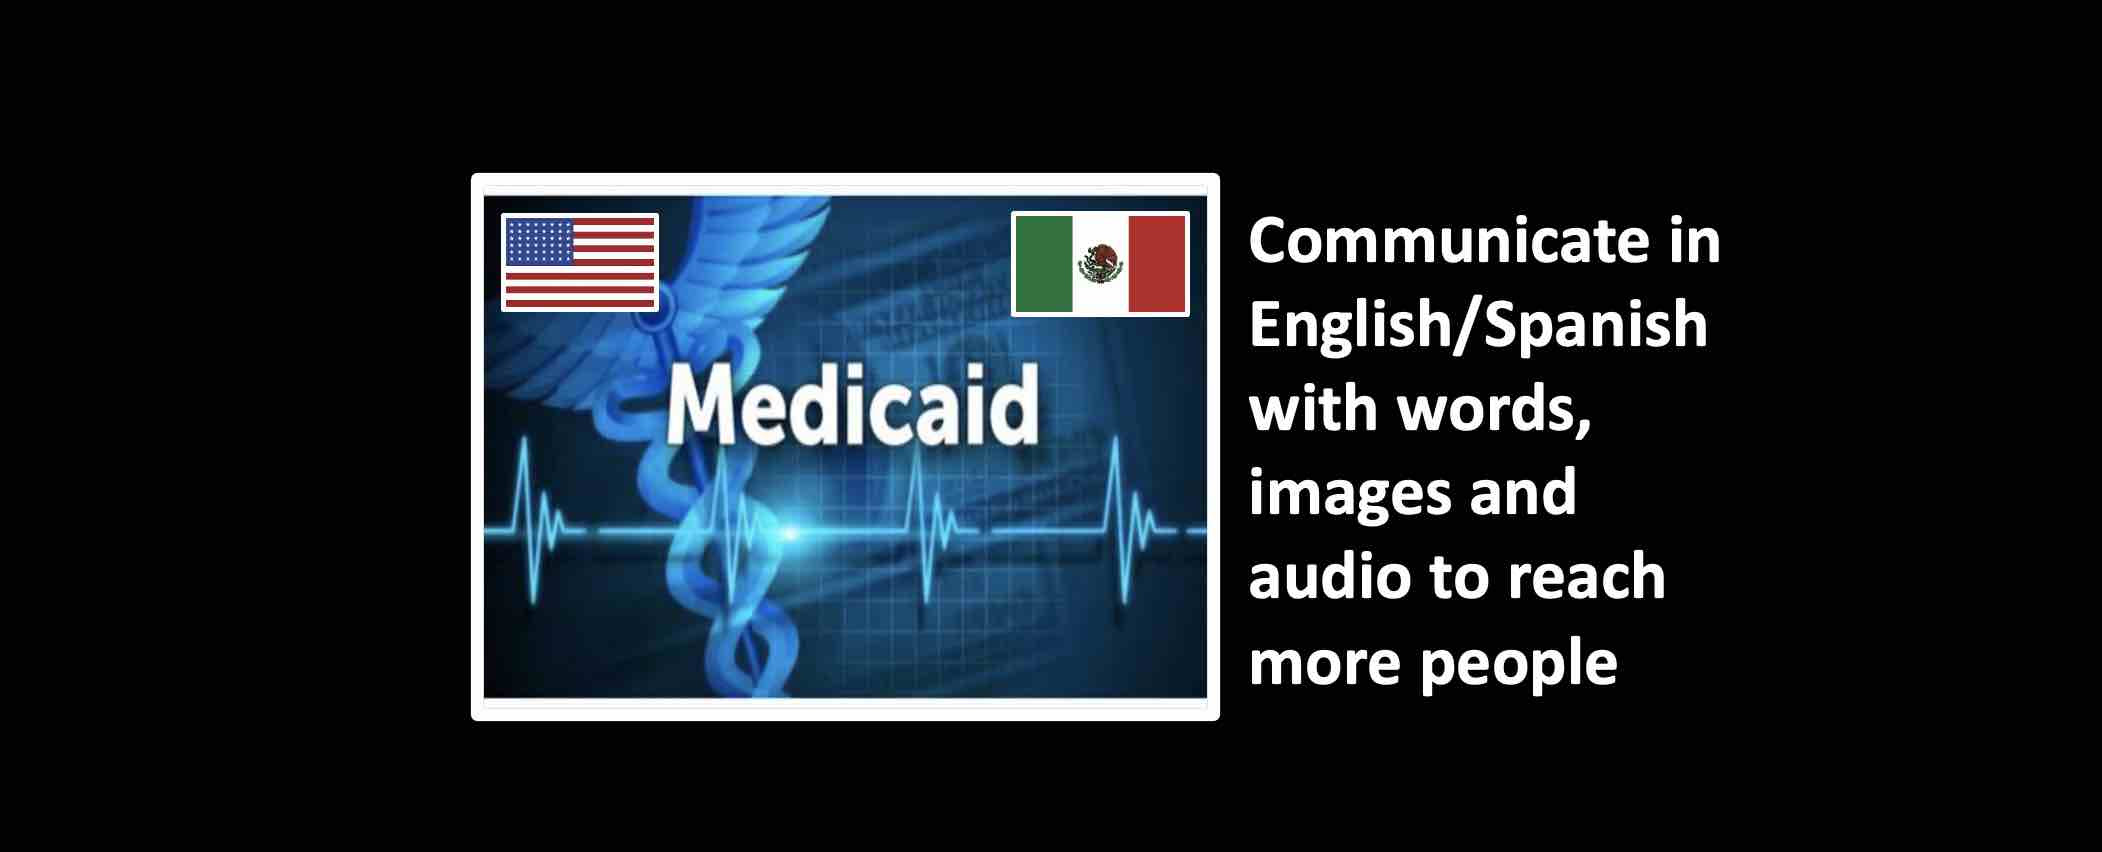 Use Audio Infographics to reach more people in English and Spanish